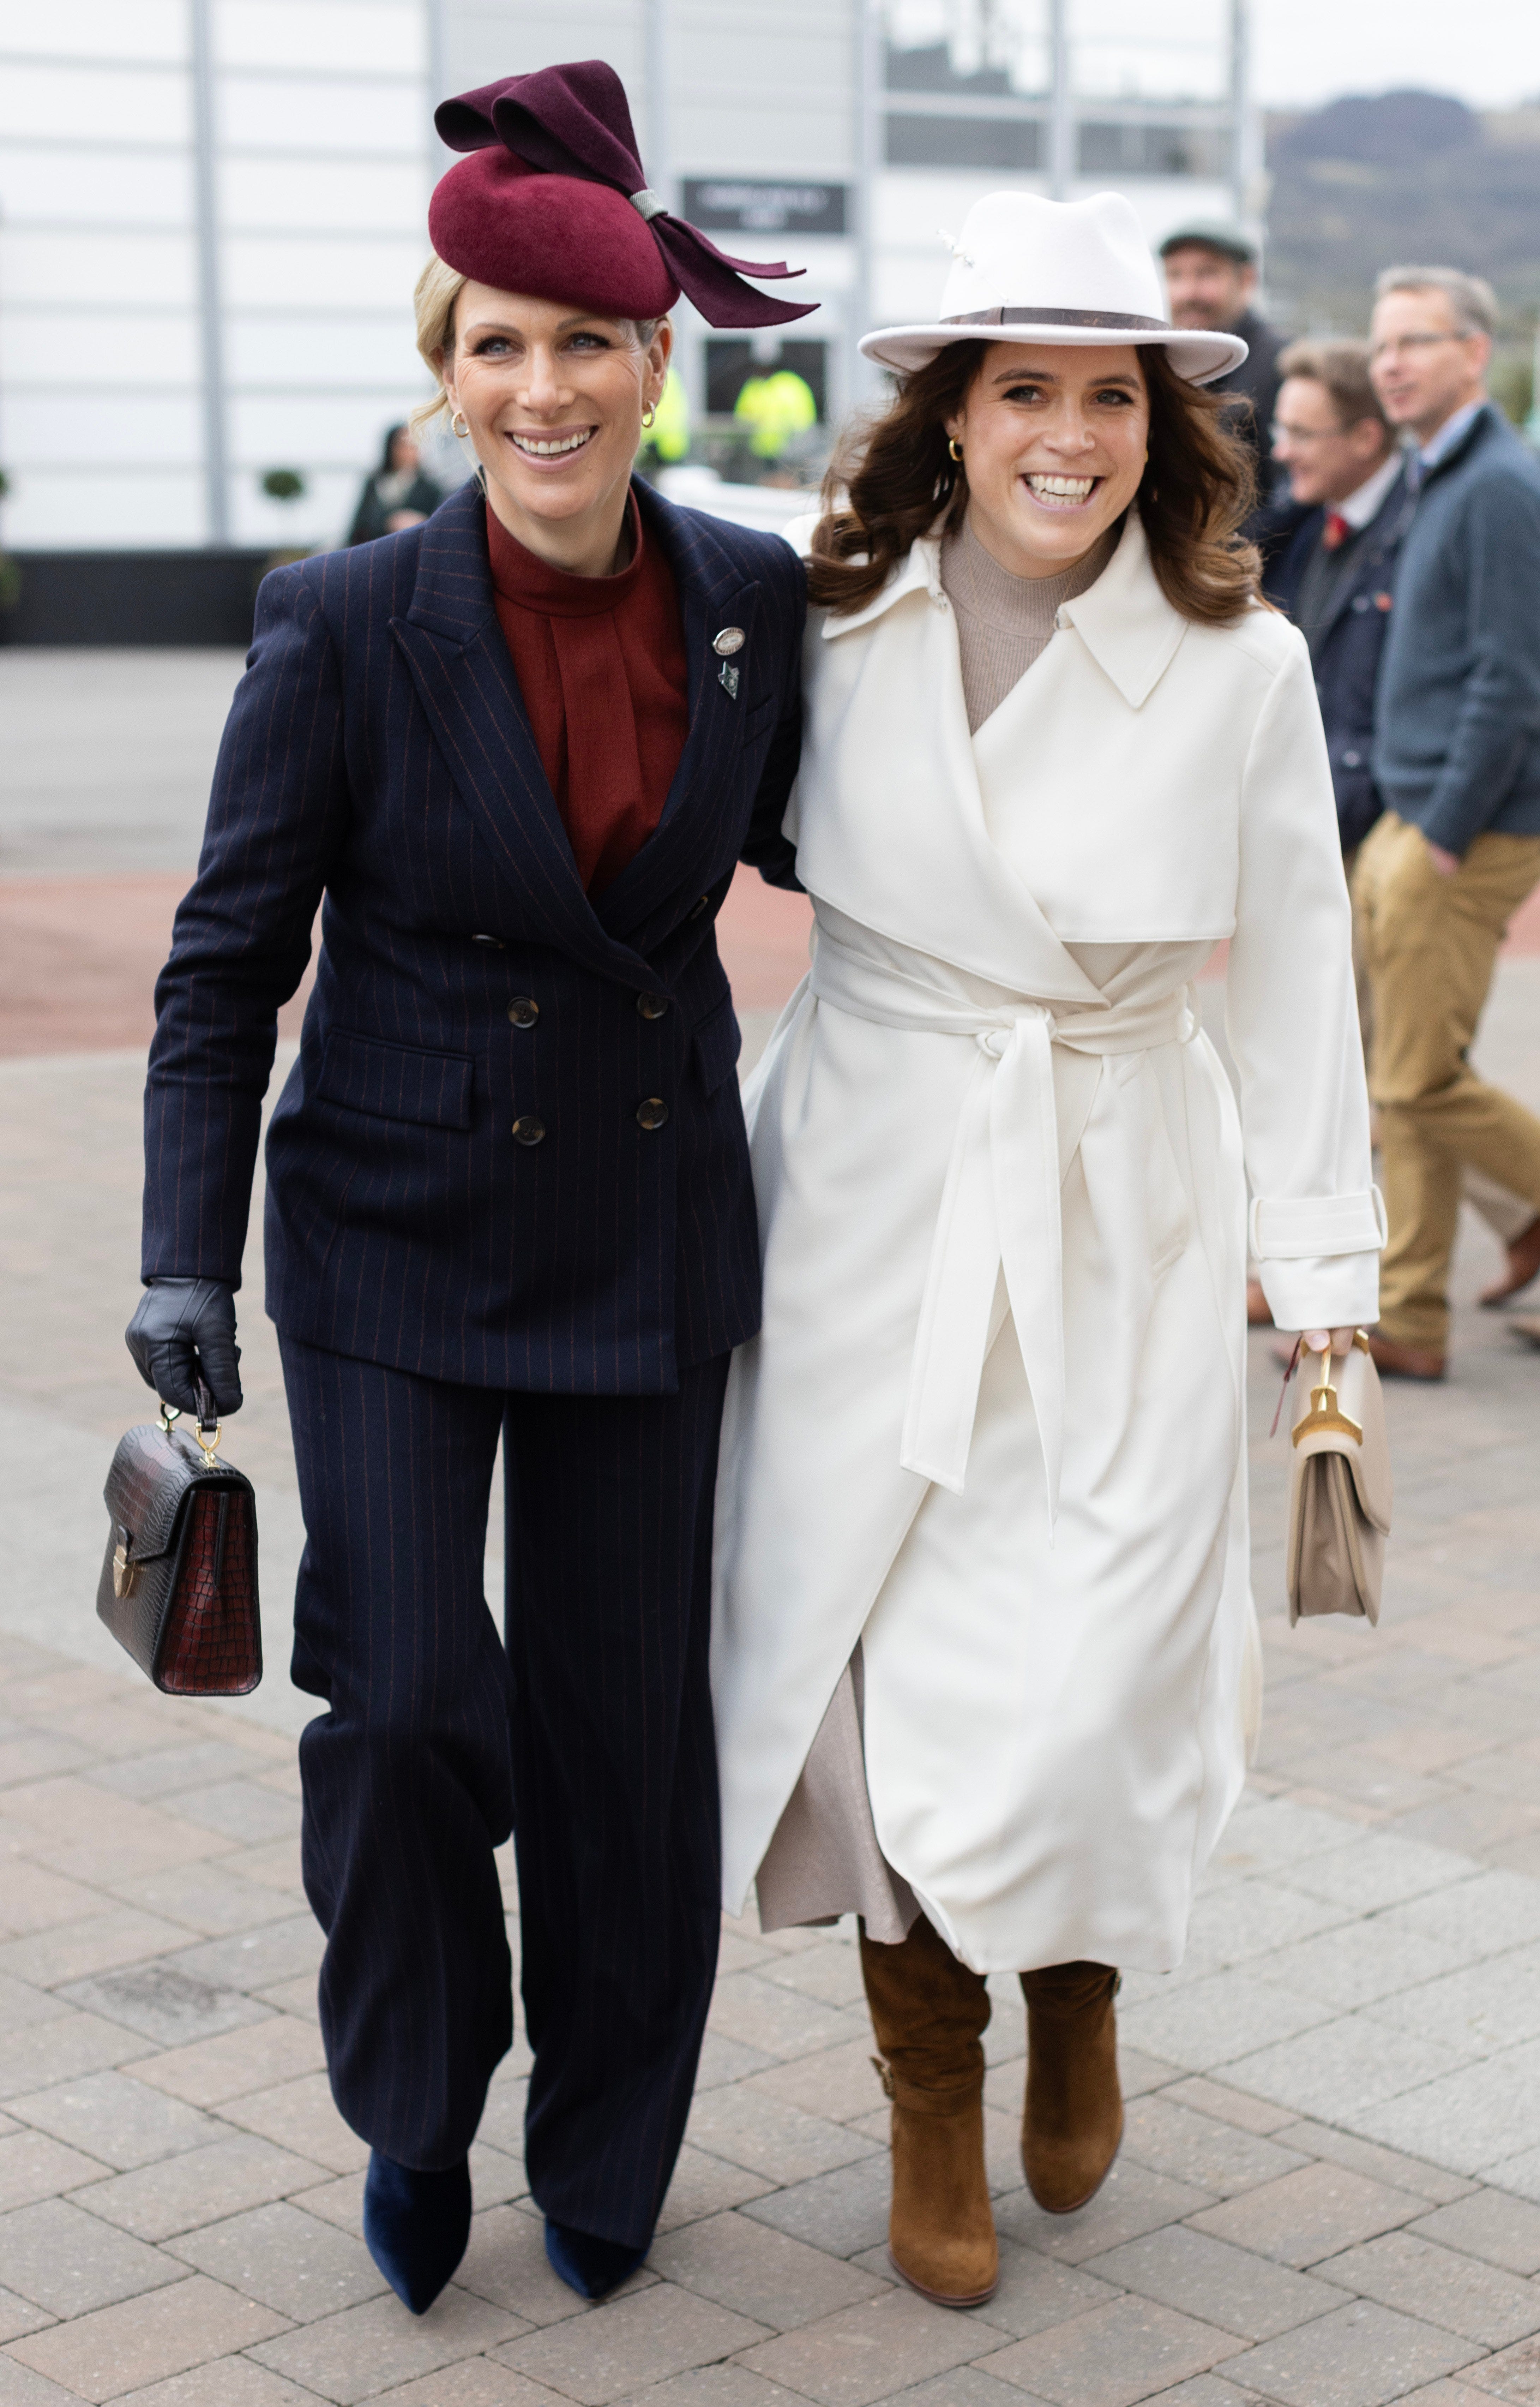 Zara Tindall and Princess Eugenie Take Our Minds Off #KateGate with Their Sweet Cousin Moment